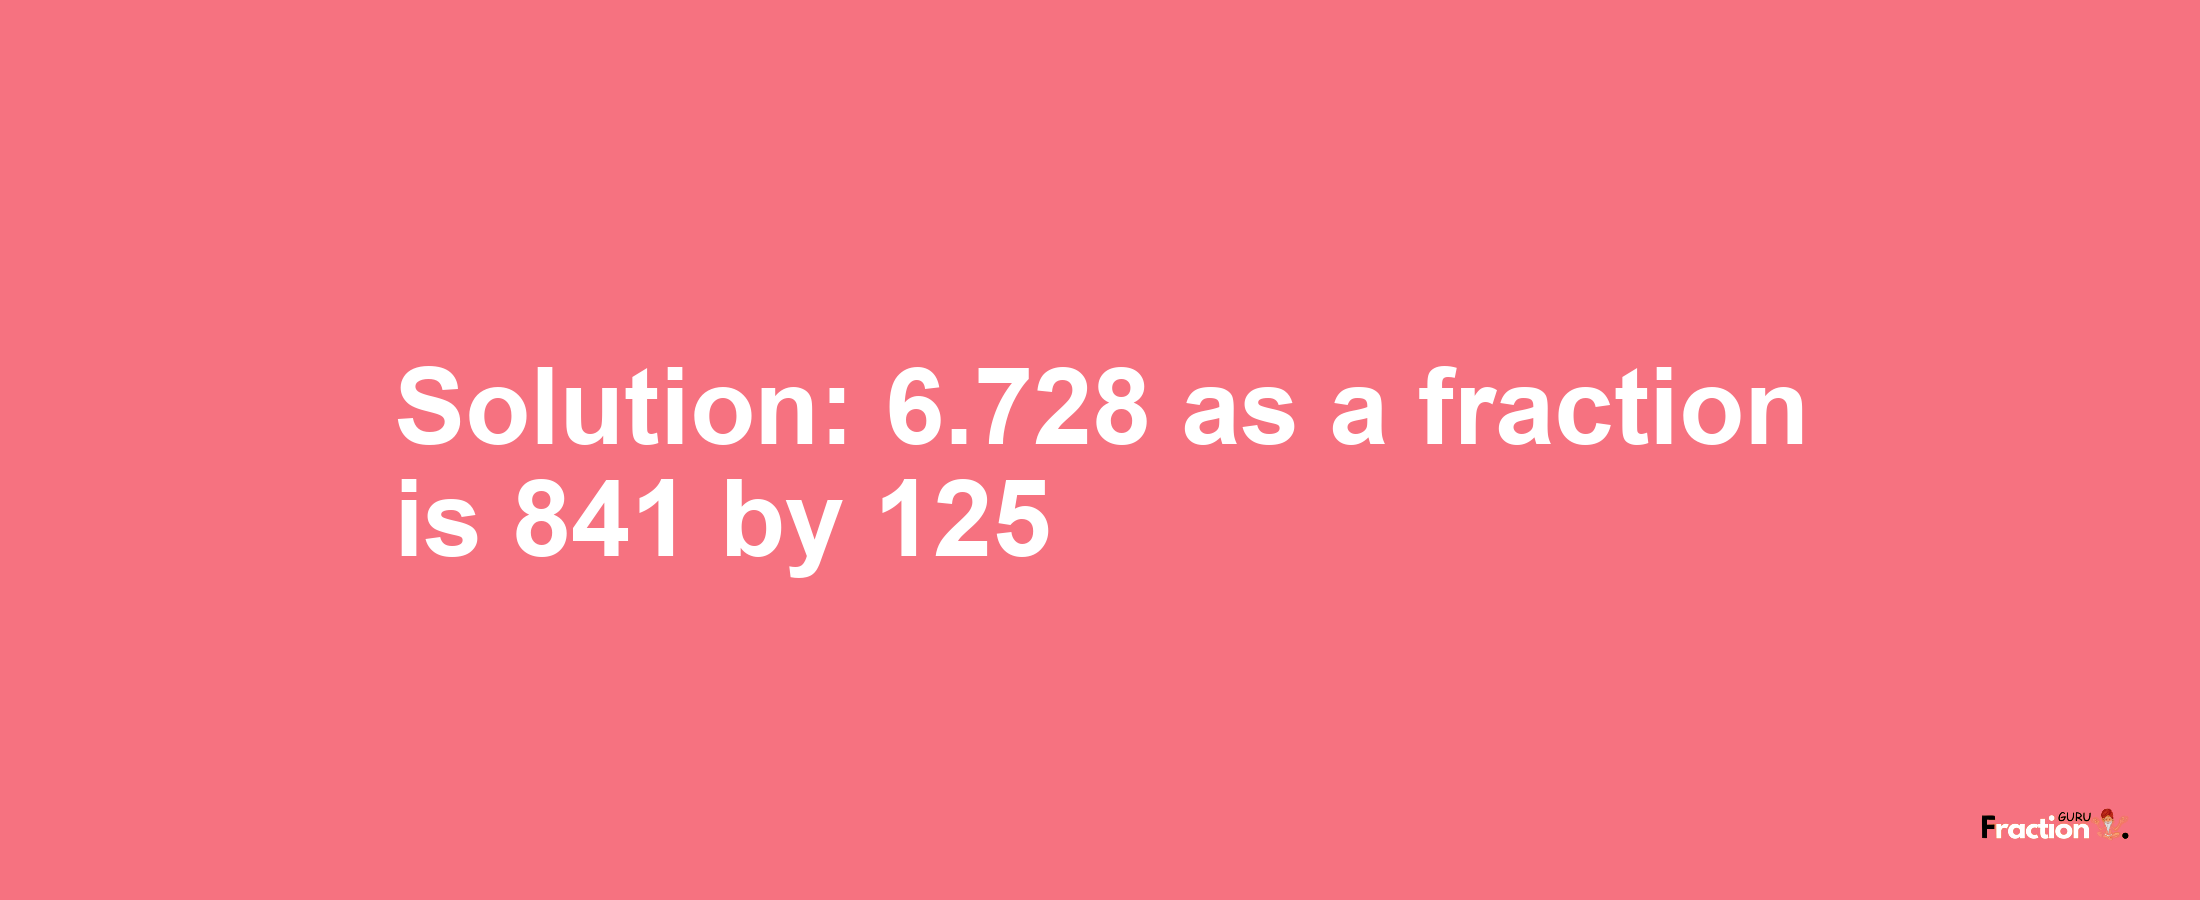 Solution:6.728 as a fraction is 841/125